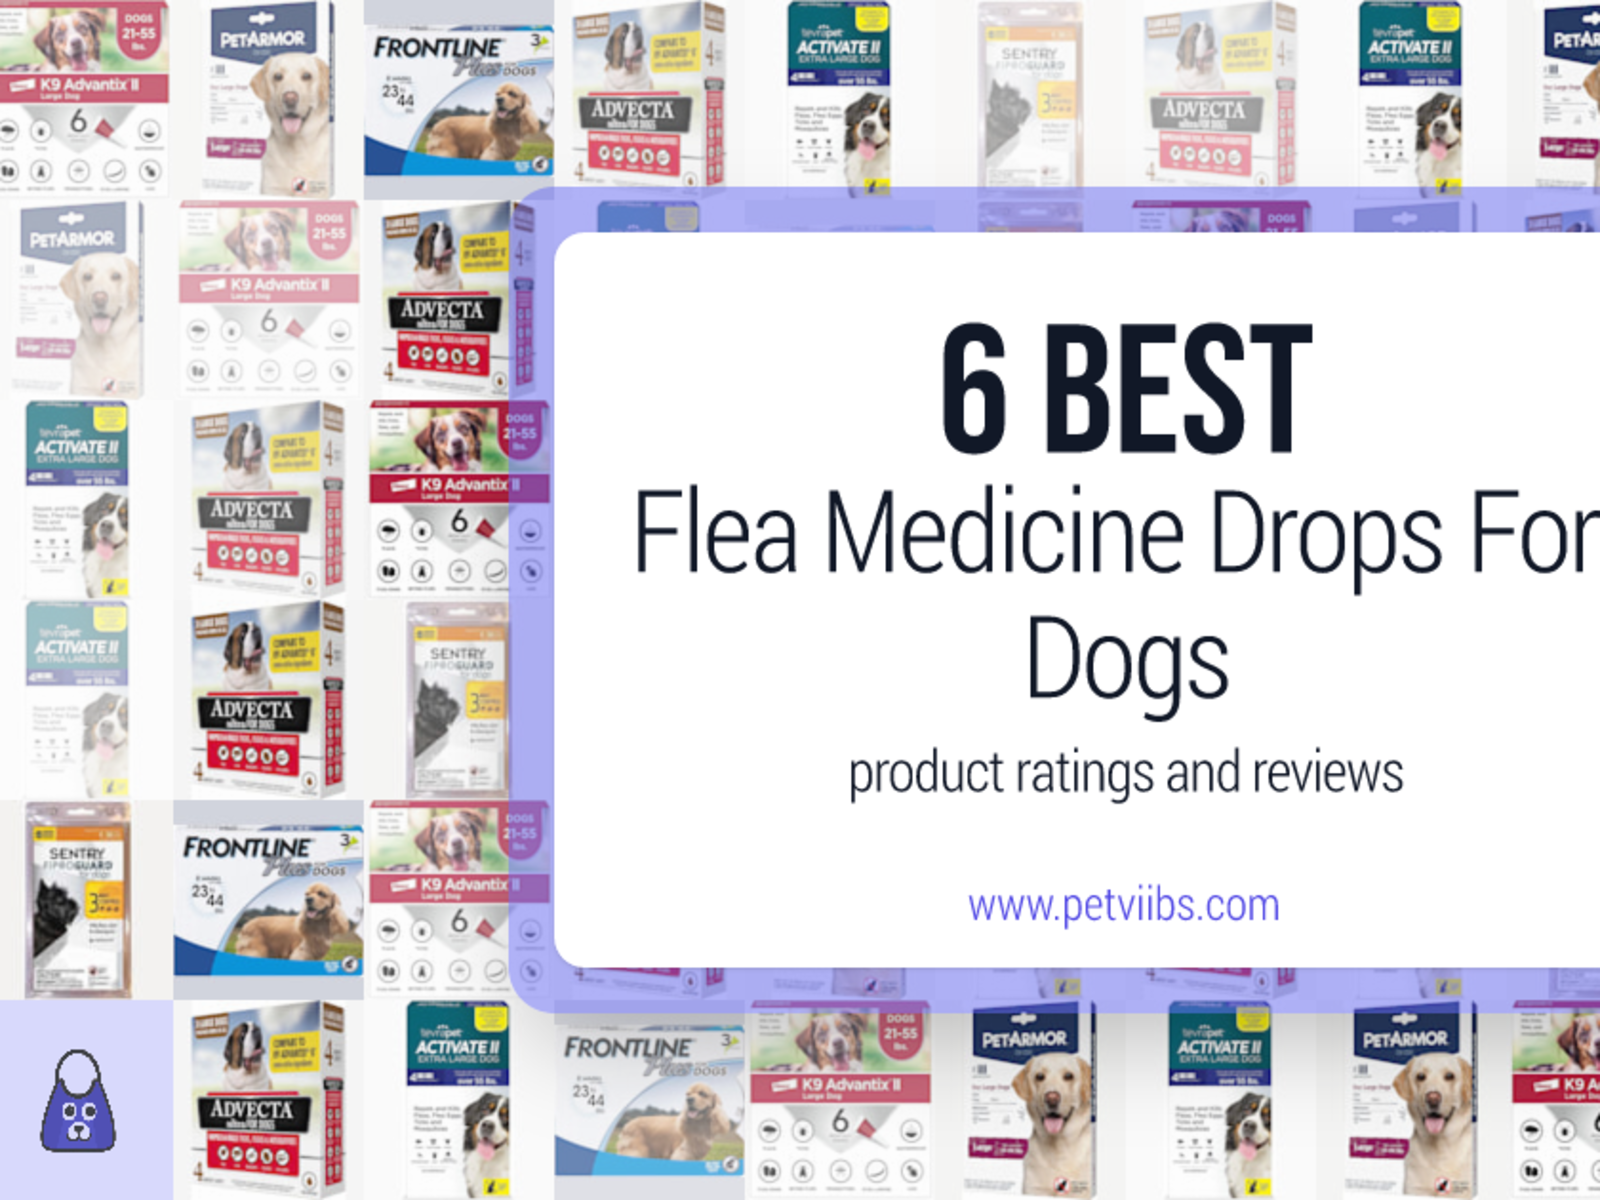 Best Flea Medicine Drops For Dogs Ratings and Reviews